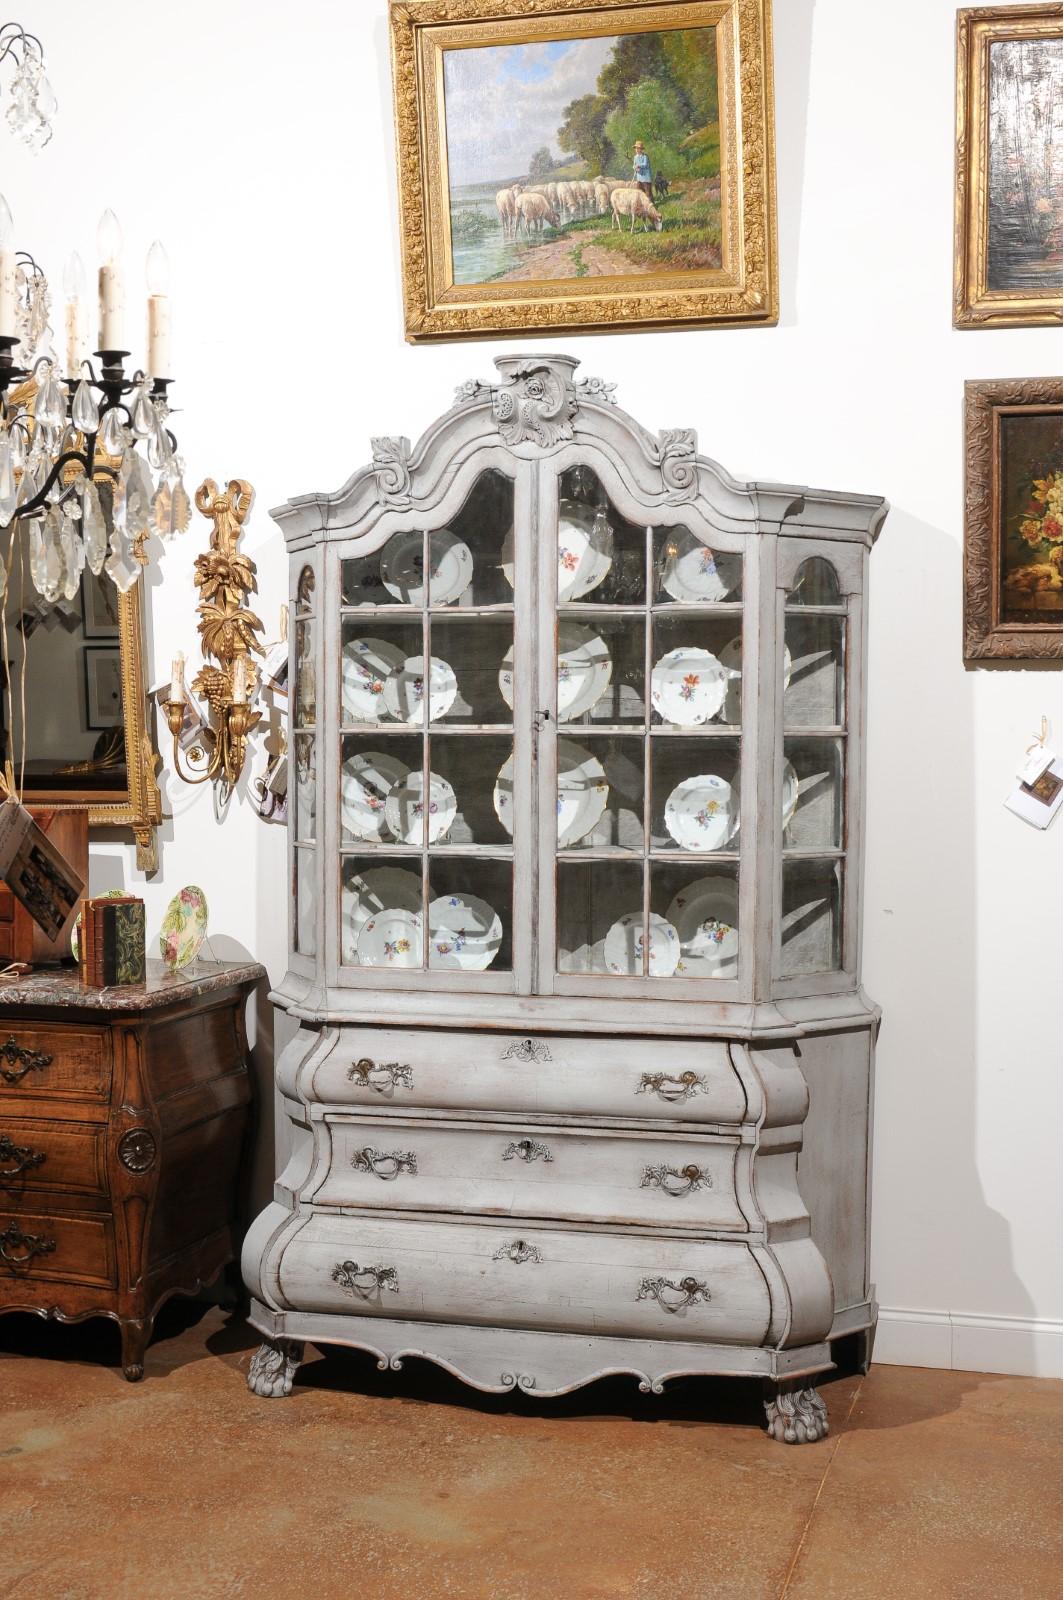 A Dutch Rococo style painted wood vitrine cabinet from the 19th century, with glass doors, rocaille-carved crest and bombé chest. Born in the Netherlands during the 19th century, this painted vitrine features an eye-catching molded cornice, adorned